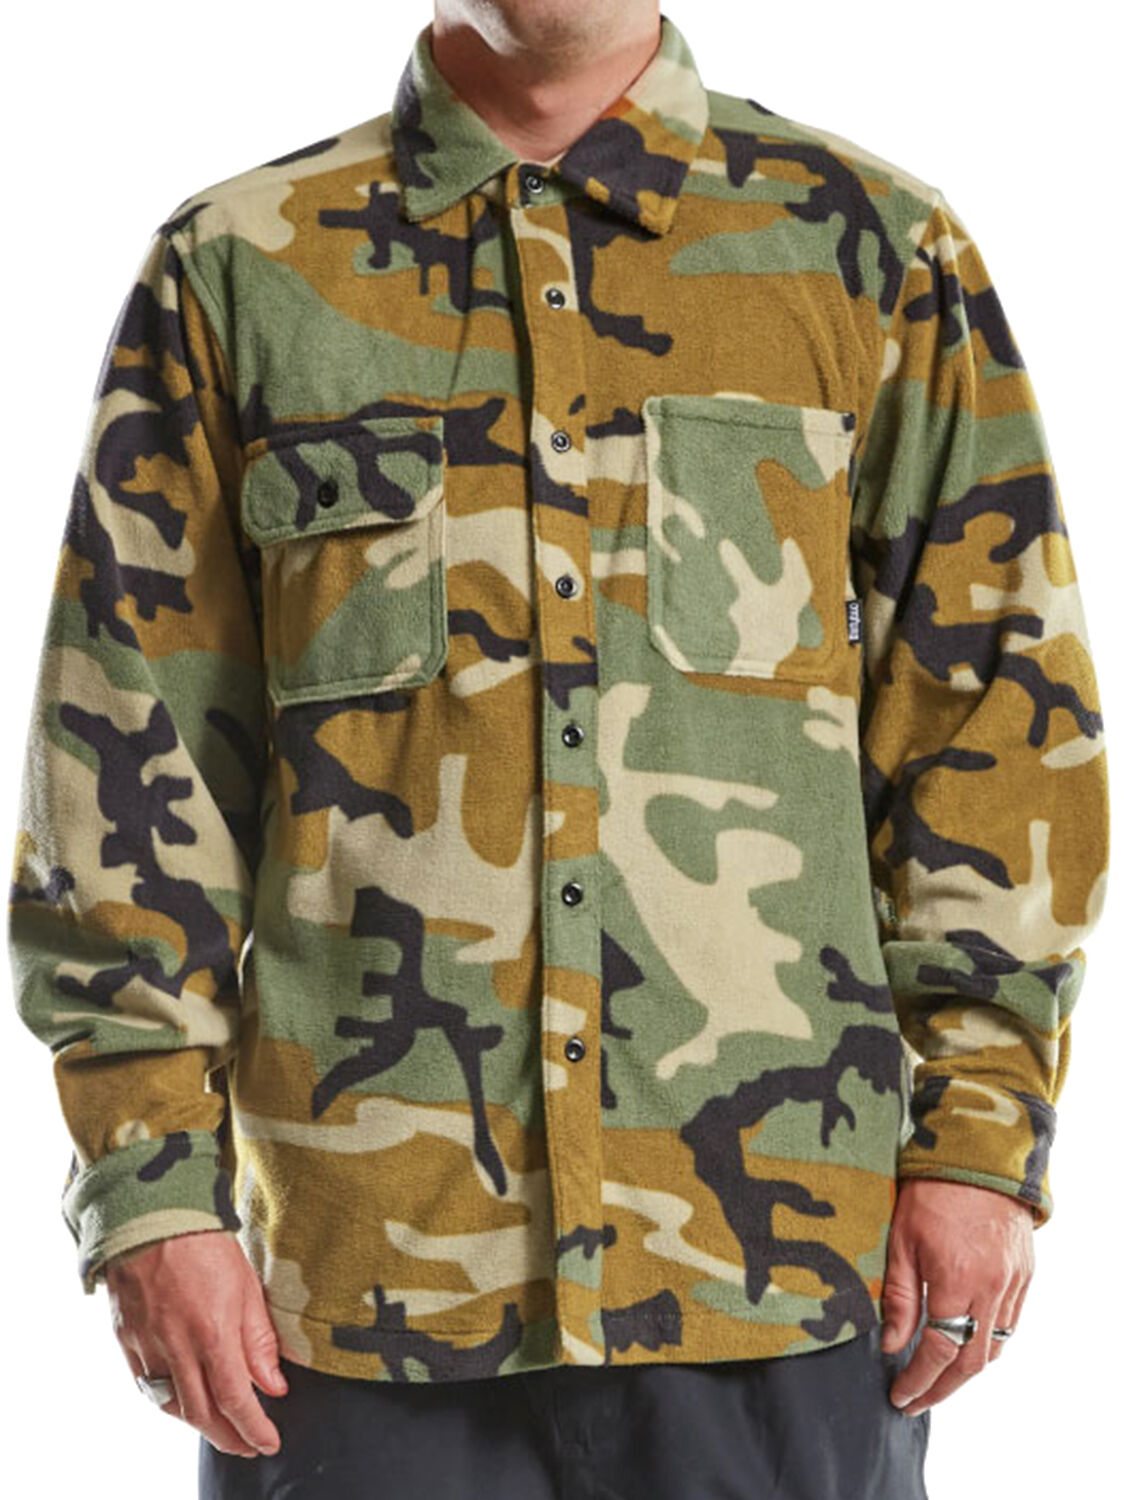 THIRTYTWO REST STOP SHIRT CAMO S